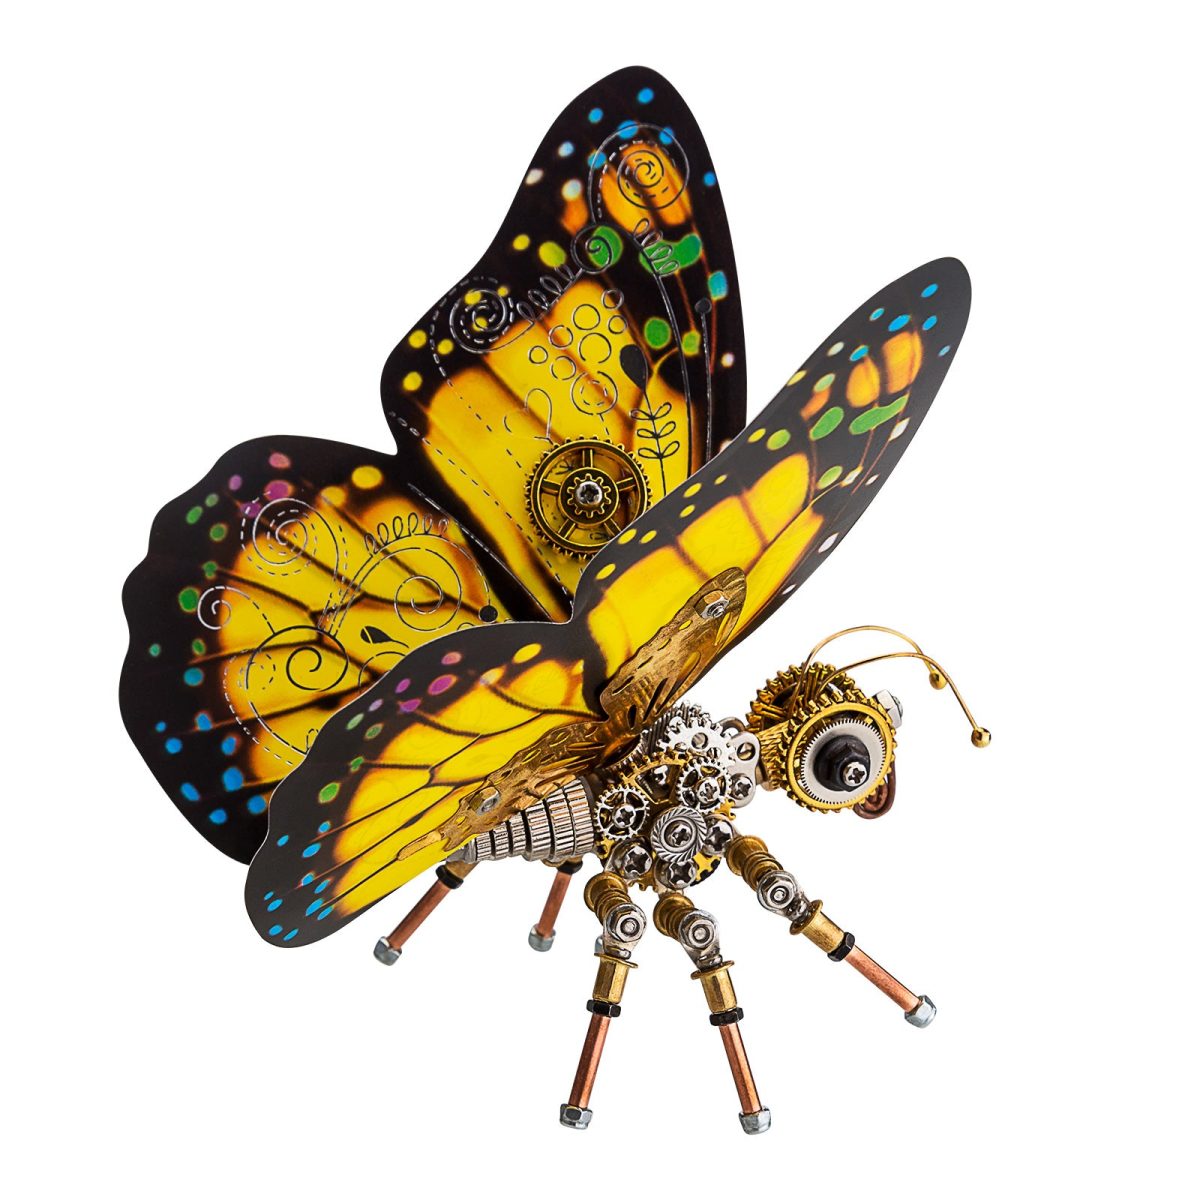 3D Metal Puzzle Tiger Swallowtail Butterfly Assembly Model